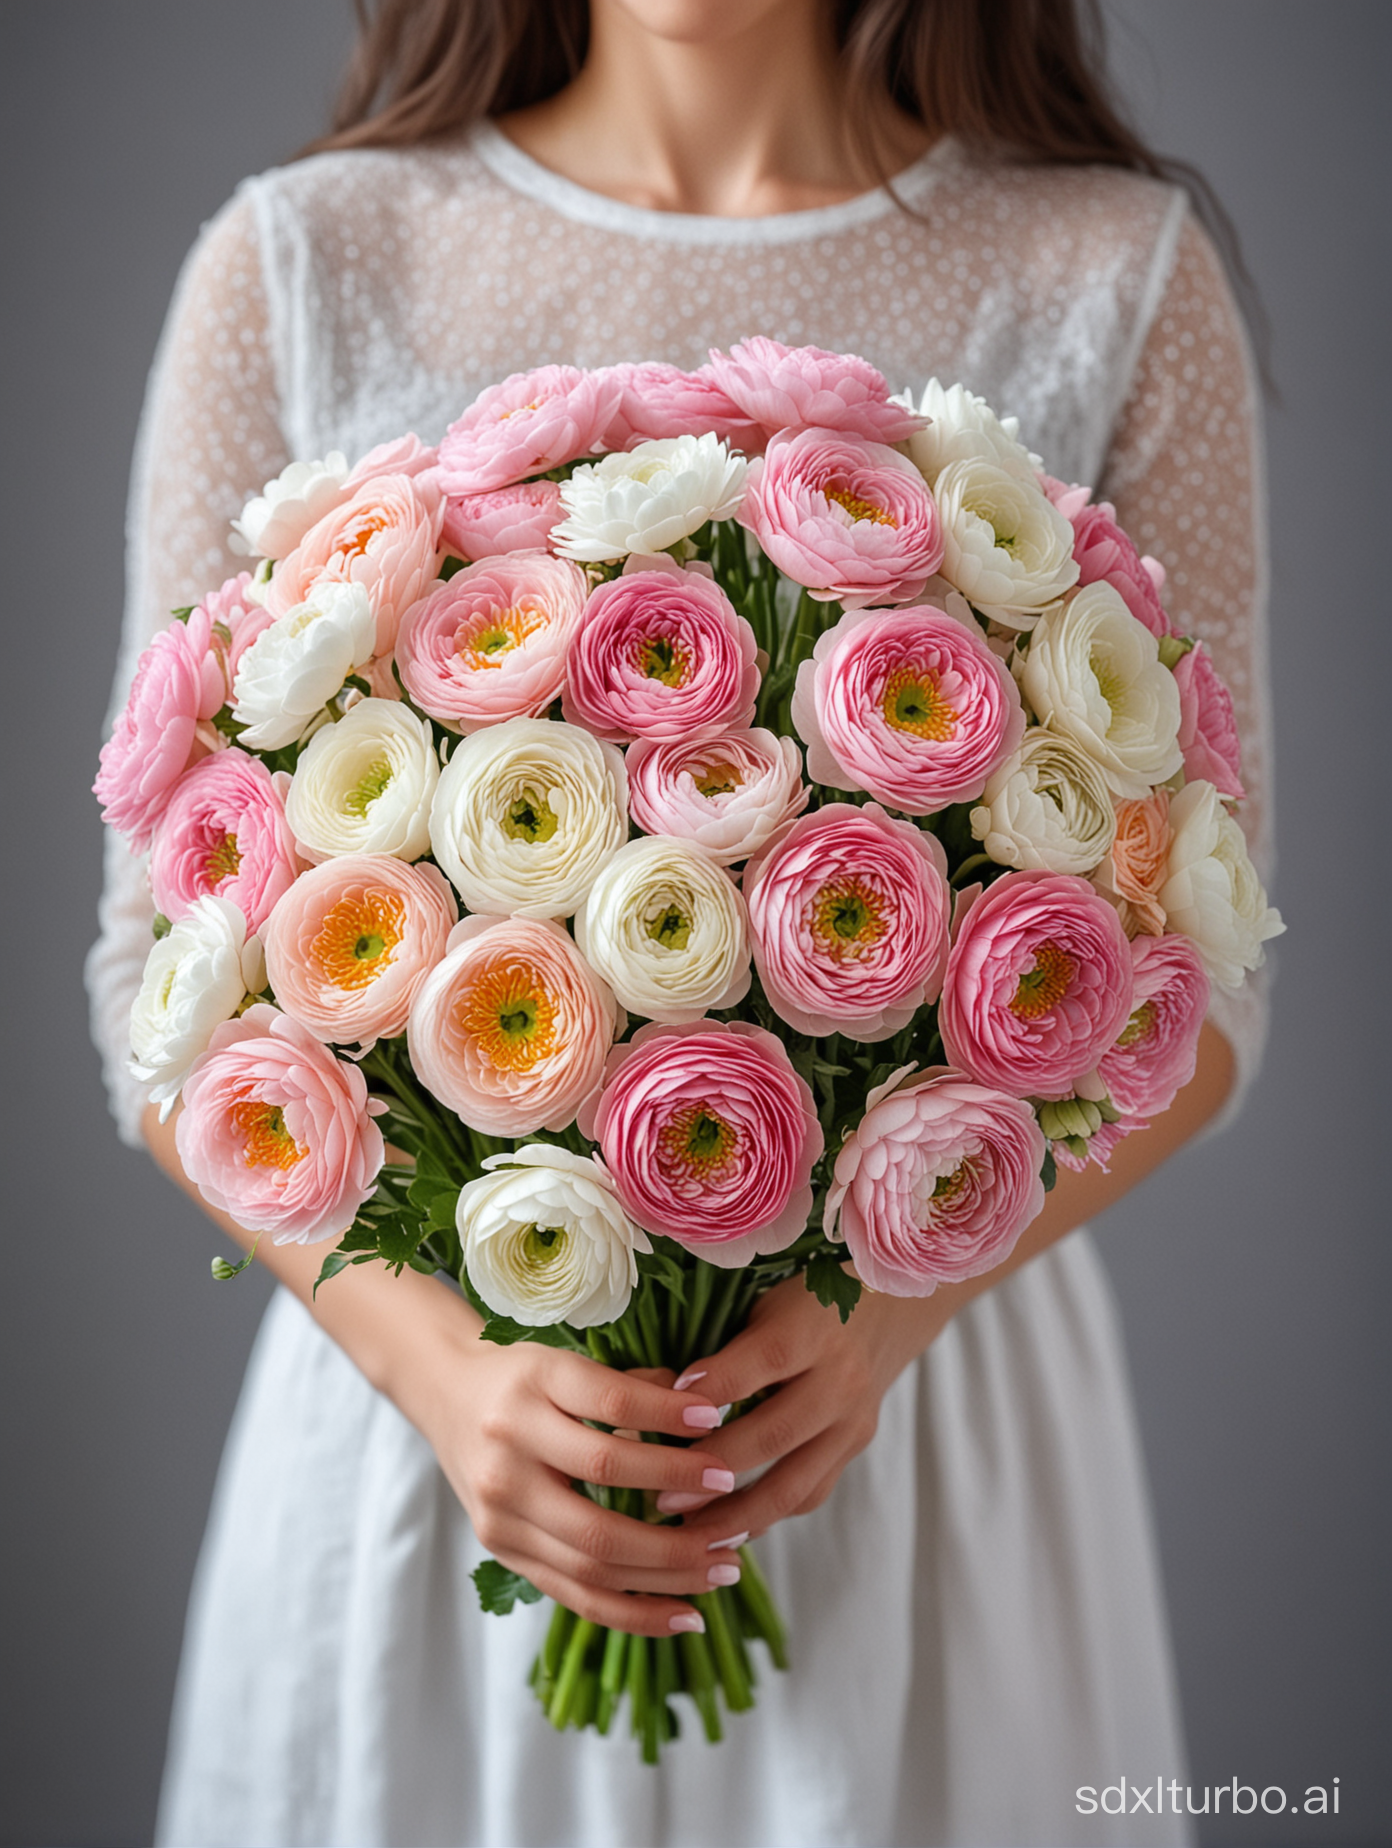 The girl holds in her hands a large bouquet of ranunculus white and pink on a gray background high quality